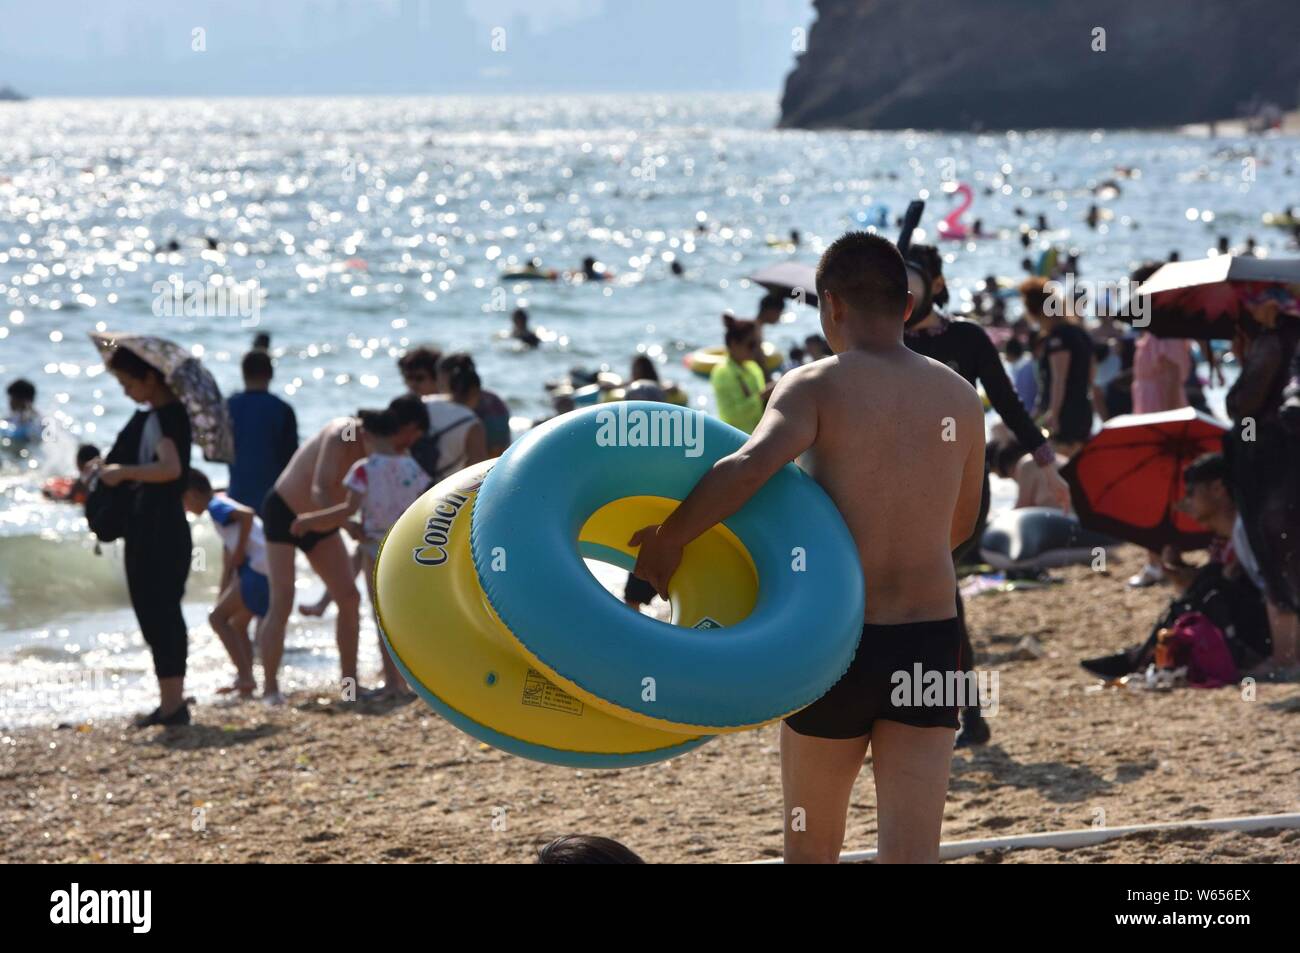 Holidaymakers crowd a beach resort to cool off on a scorching day after 'Liqiu,' meaning the start of autumn, one of the traditional 24 solar terms, i Stock Photo